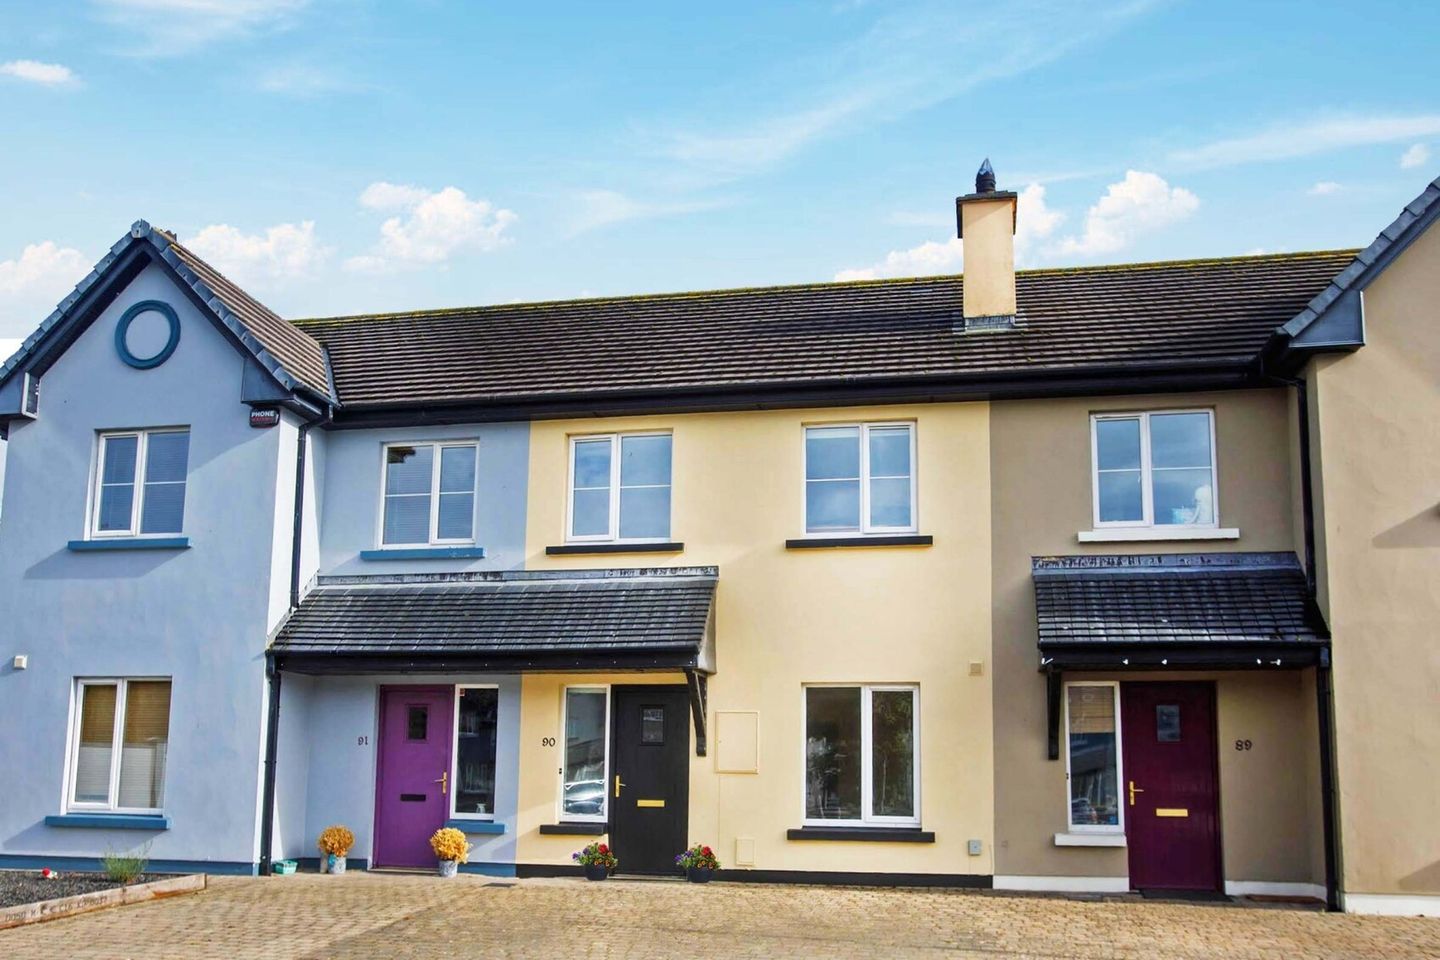 90 Clogher Faili, Tralee, Co. Kerry